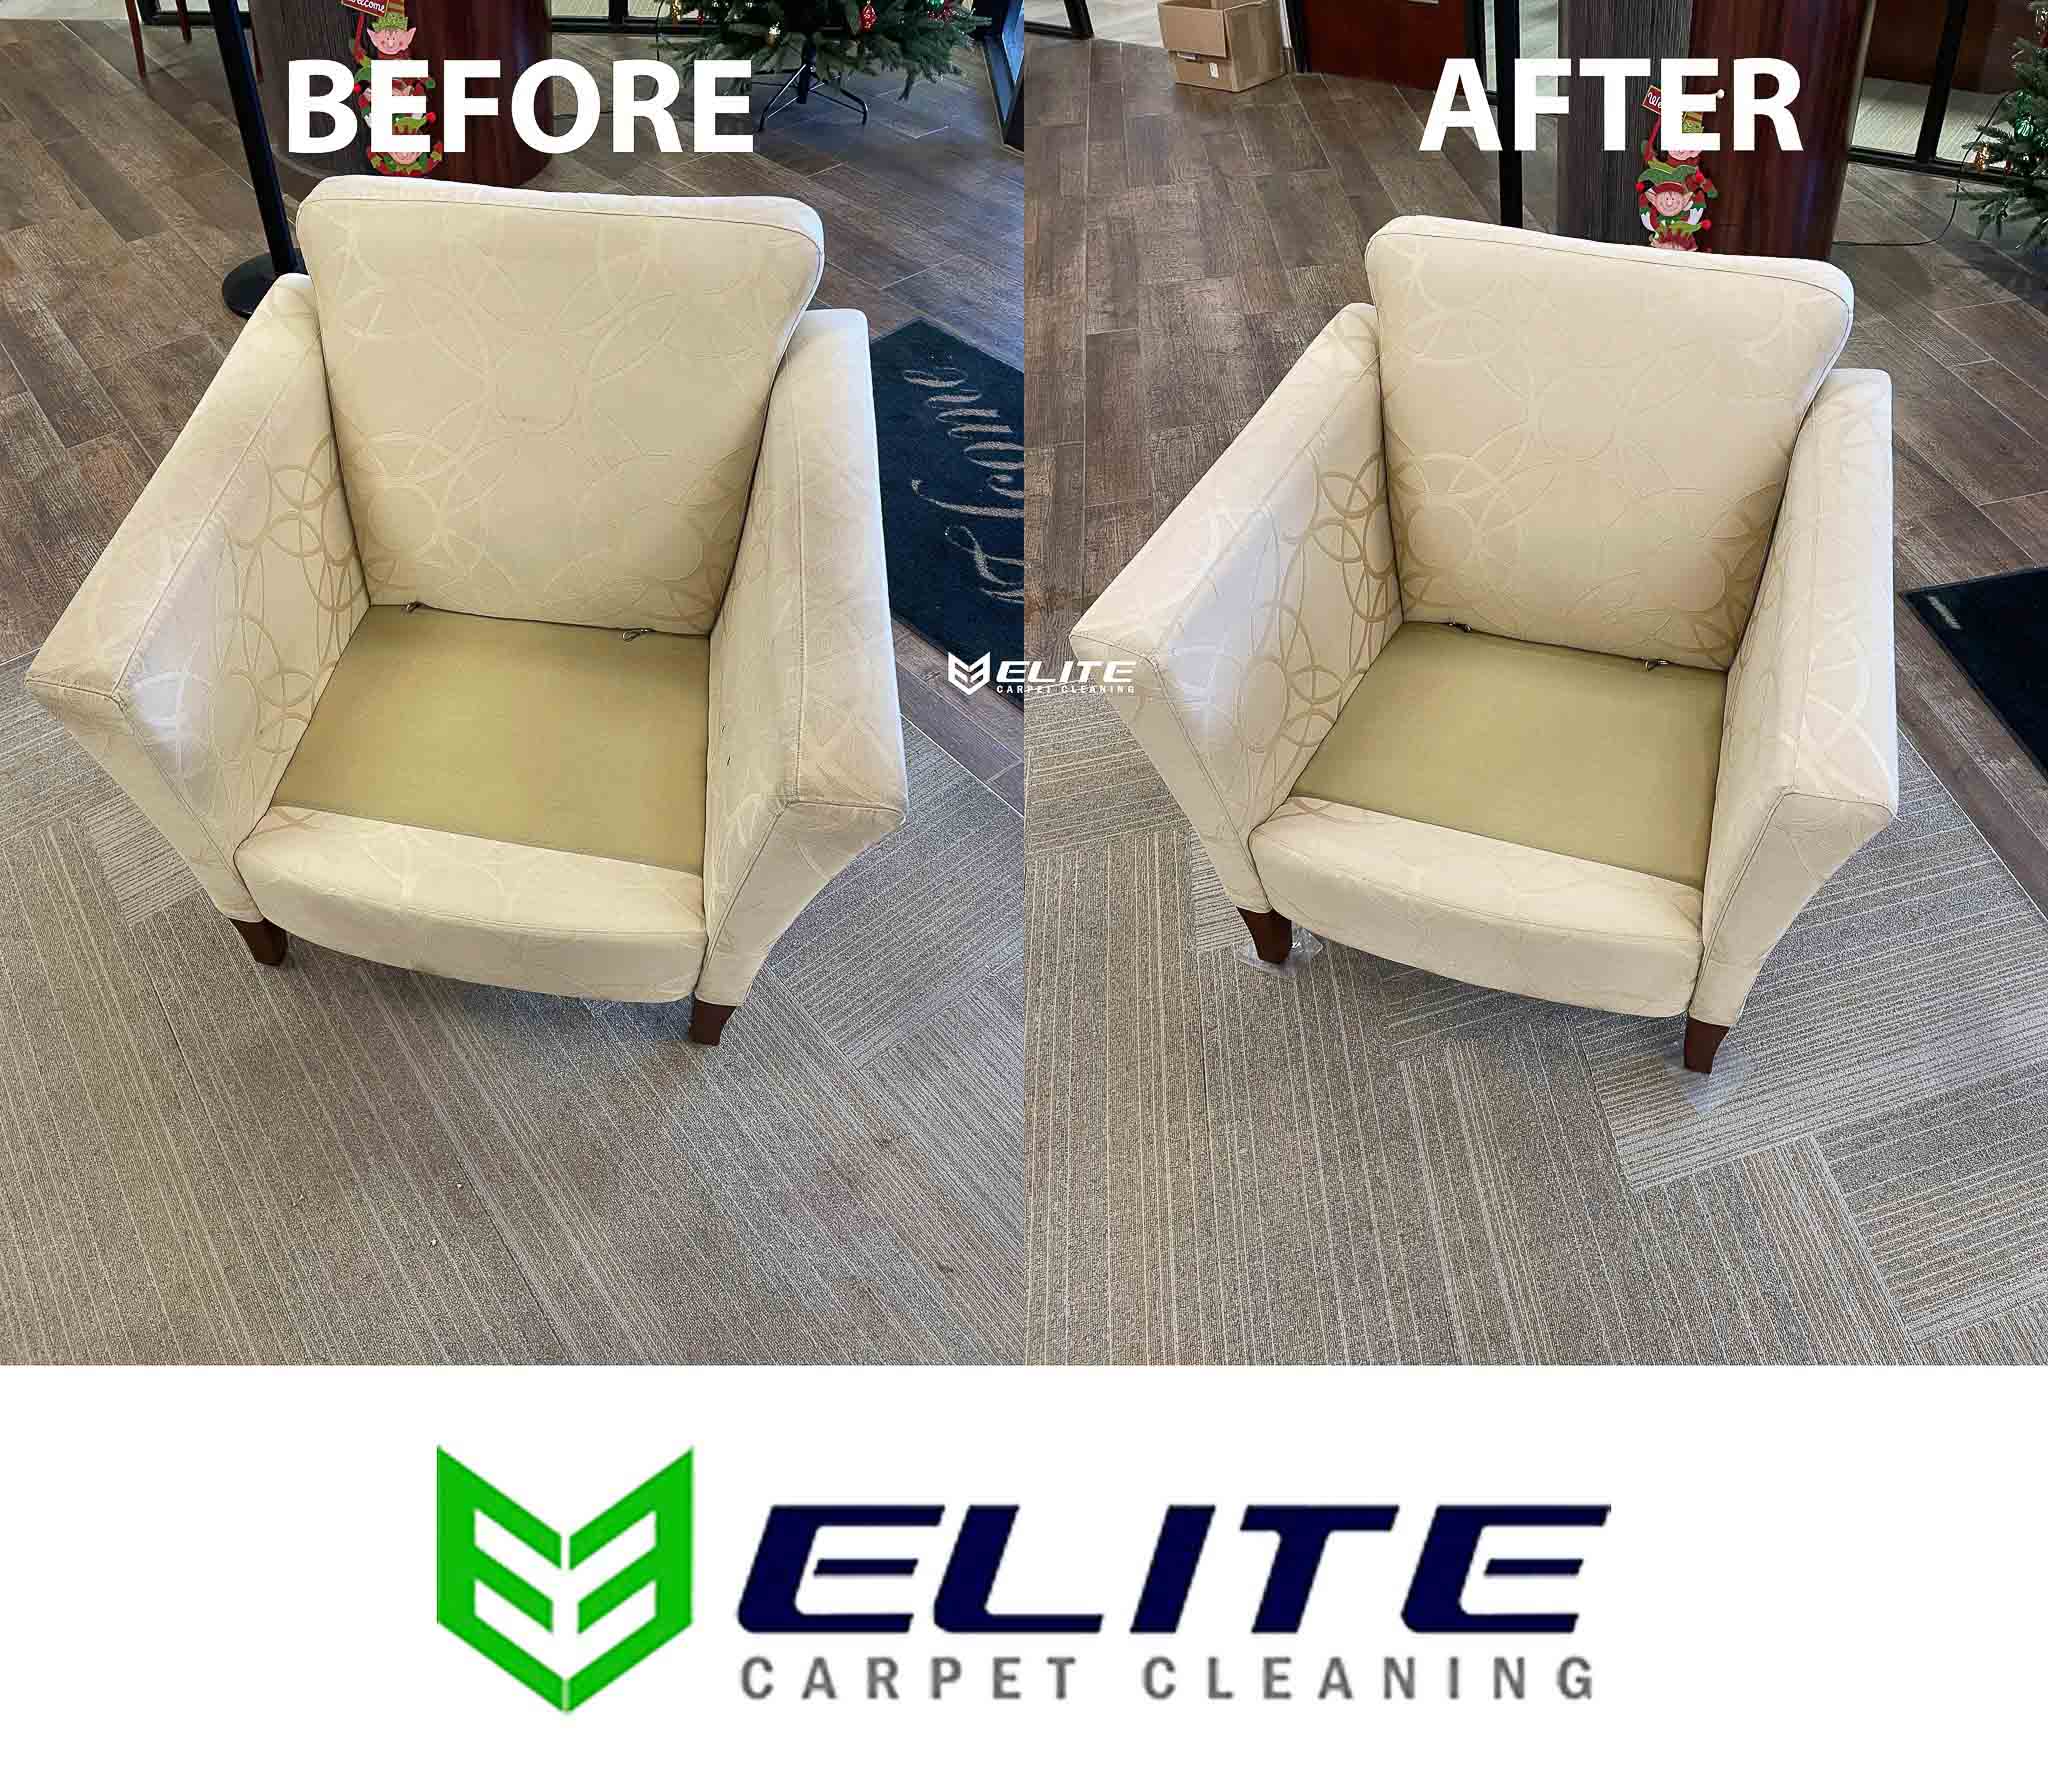 White Chair with clean upholstery in big spring tx. This chair was cleaned by Elite Carpet cleaning.